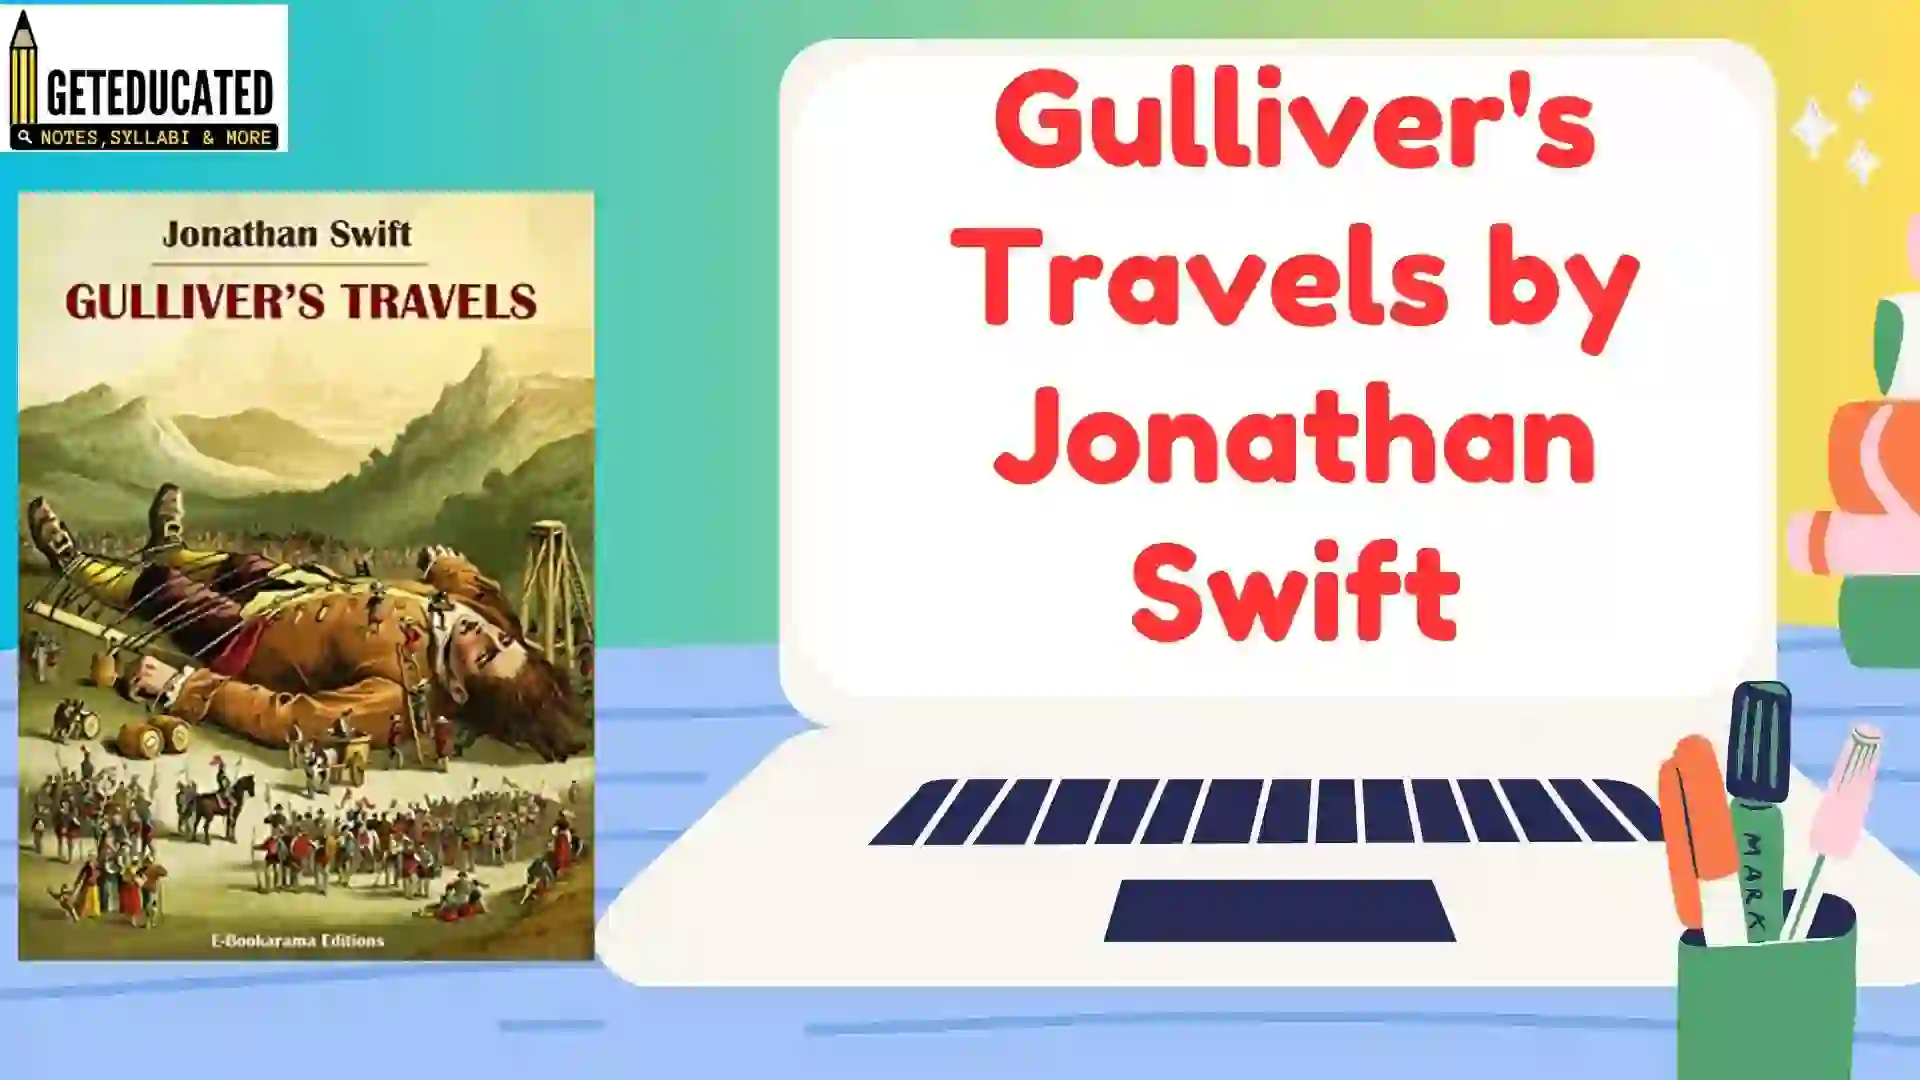 Gulliver's Travels - Character Analysis Packet, Theme Connections, & Project